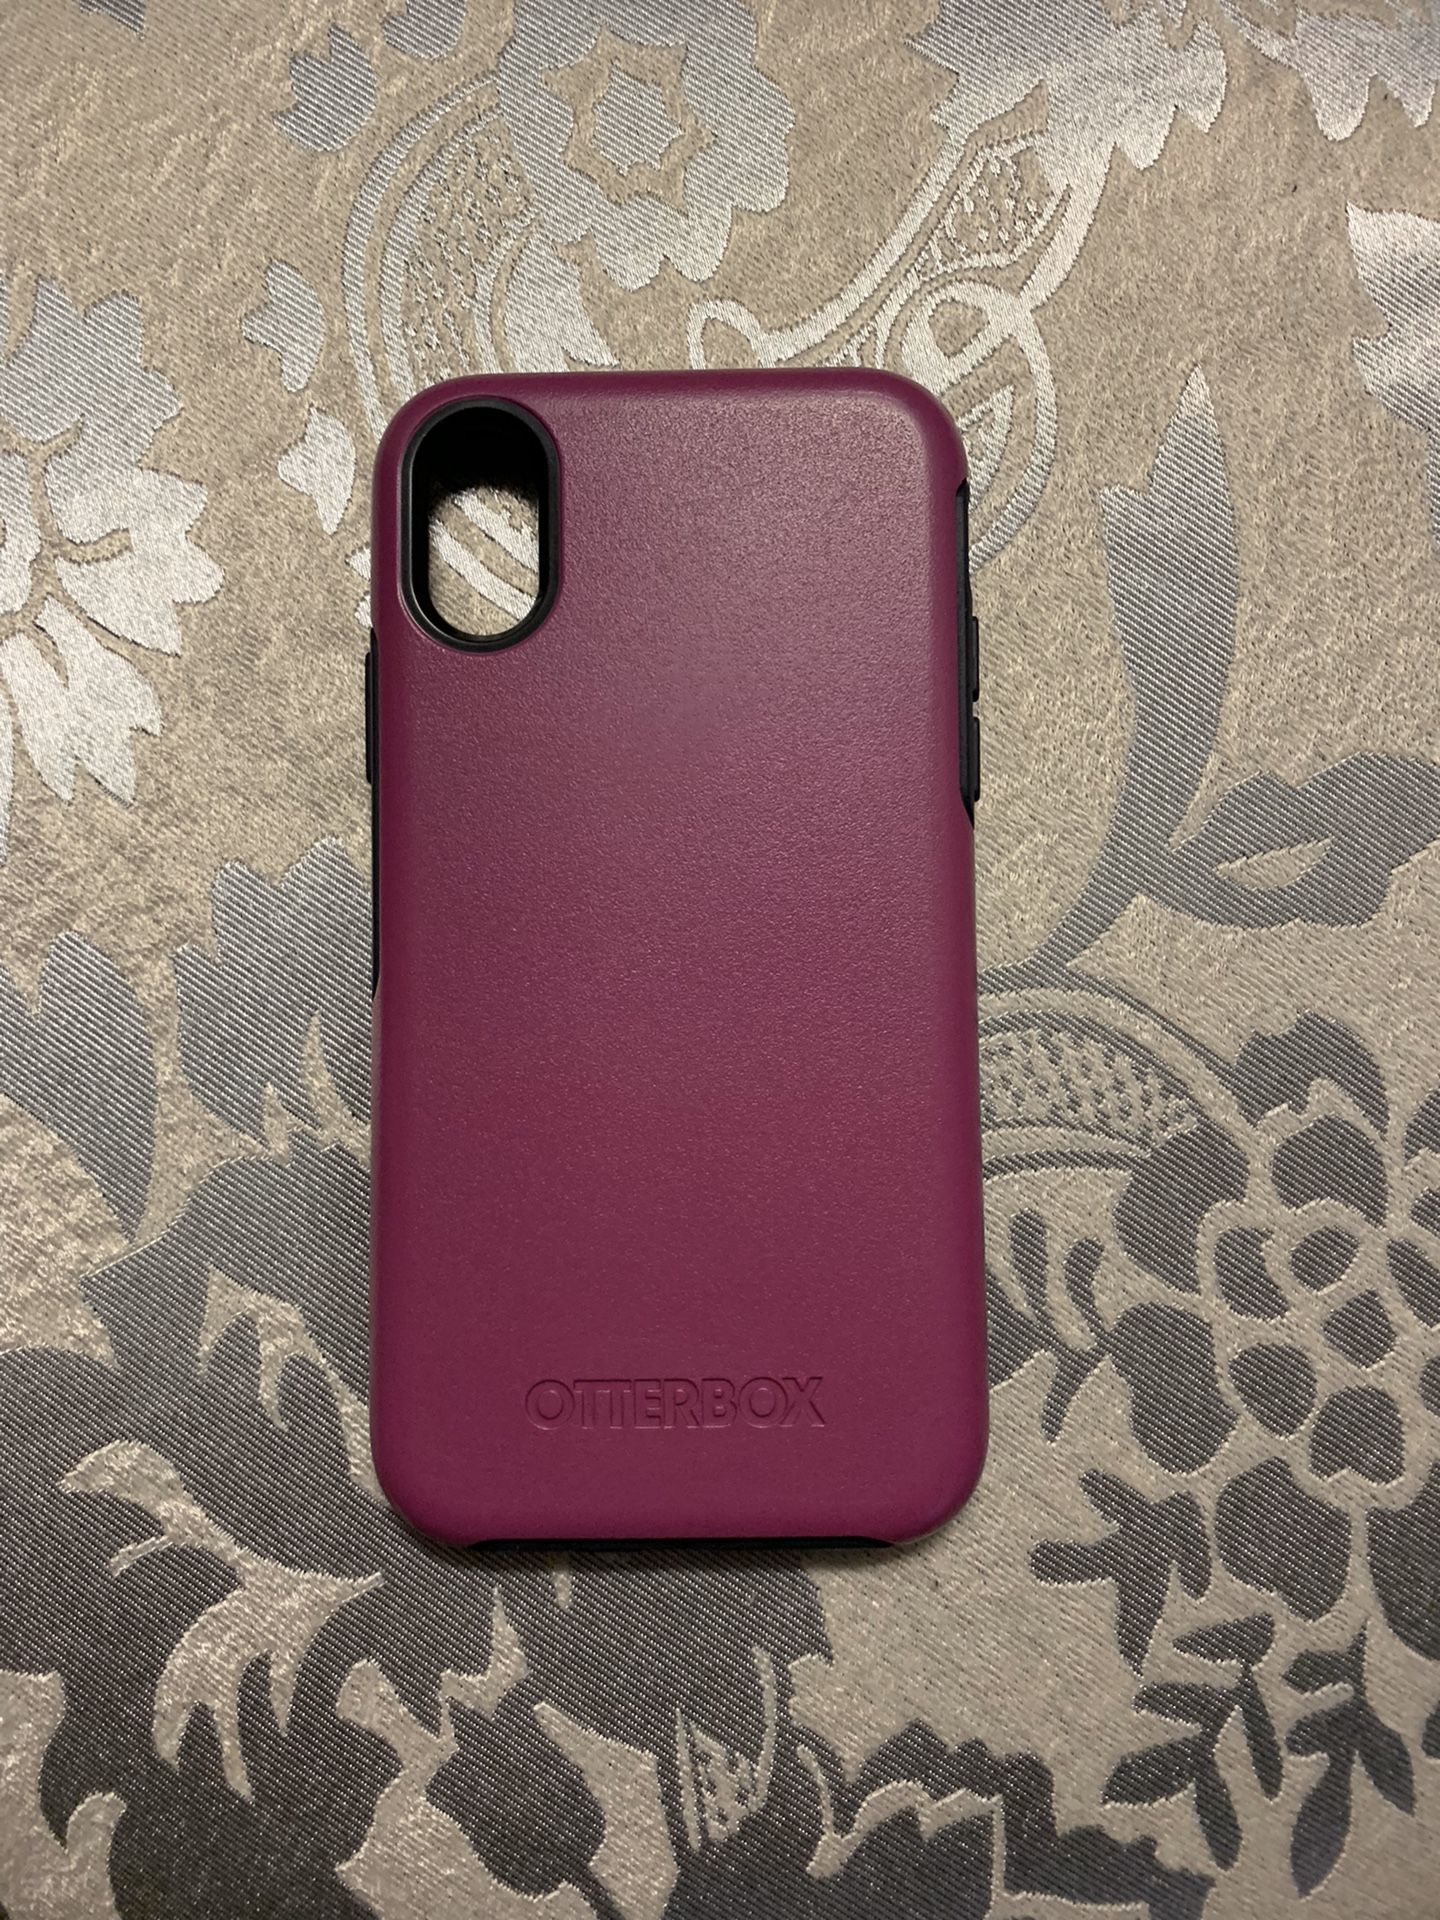 Otterbox for iPhone X